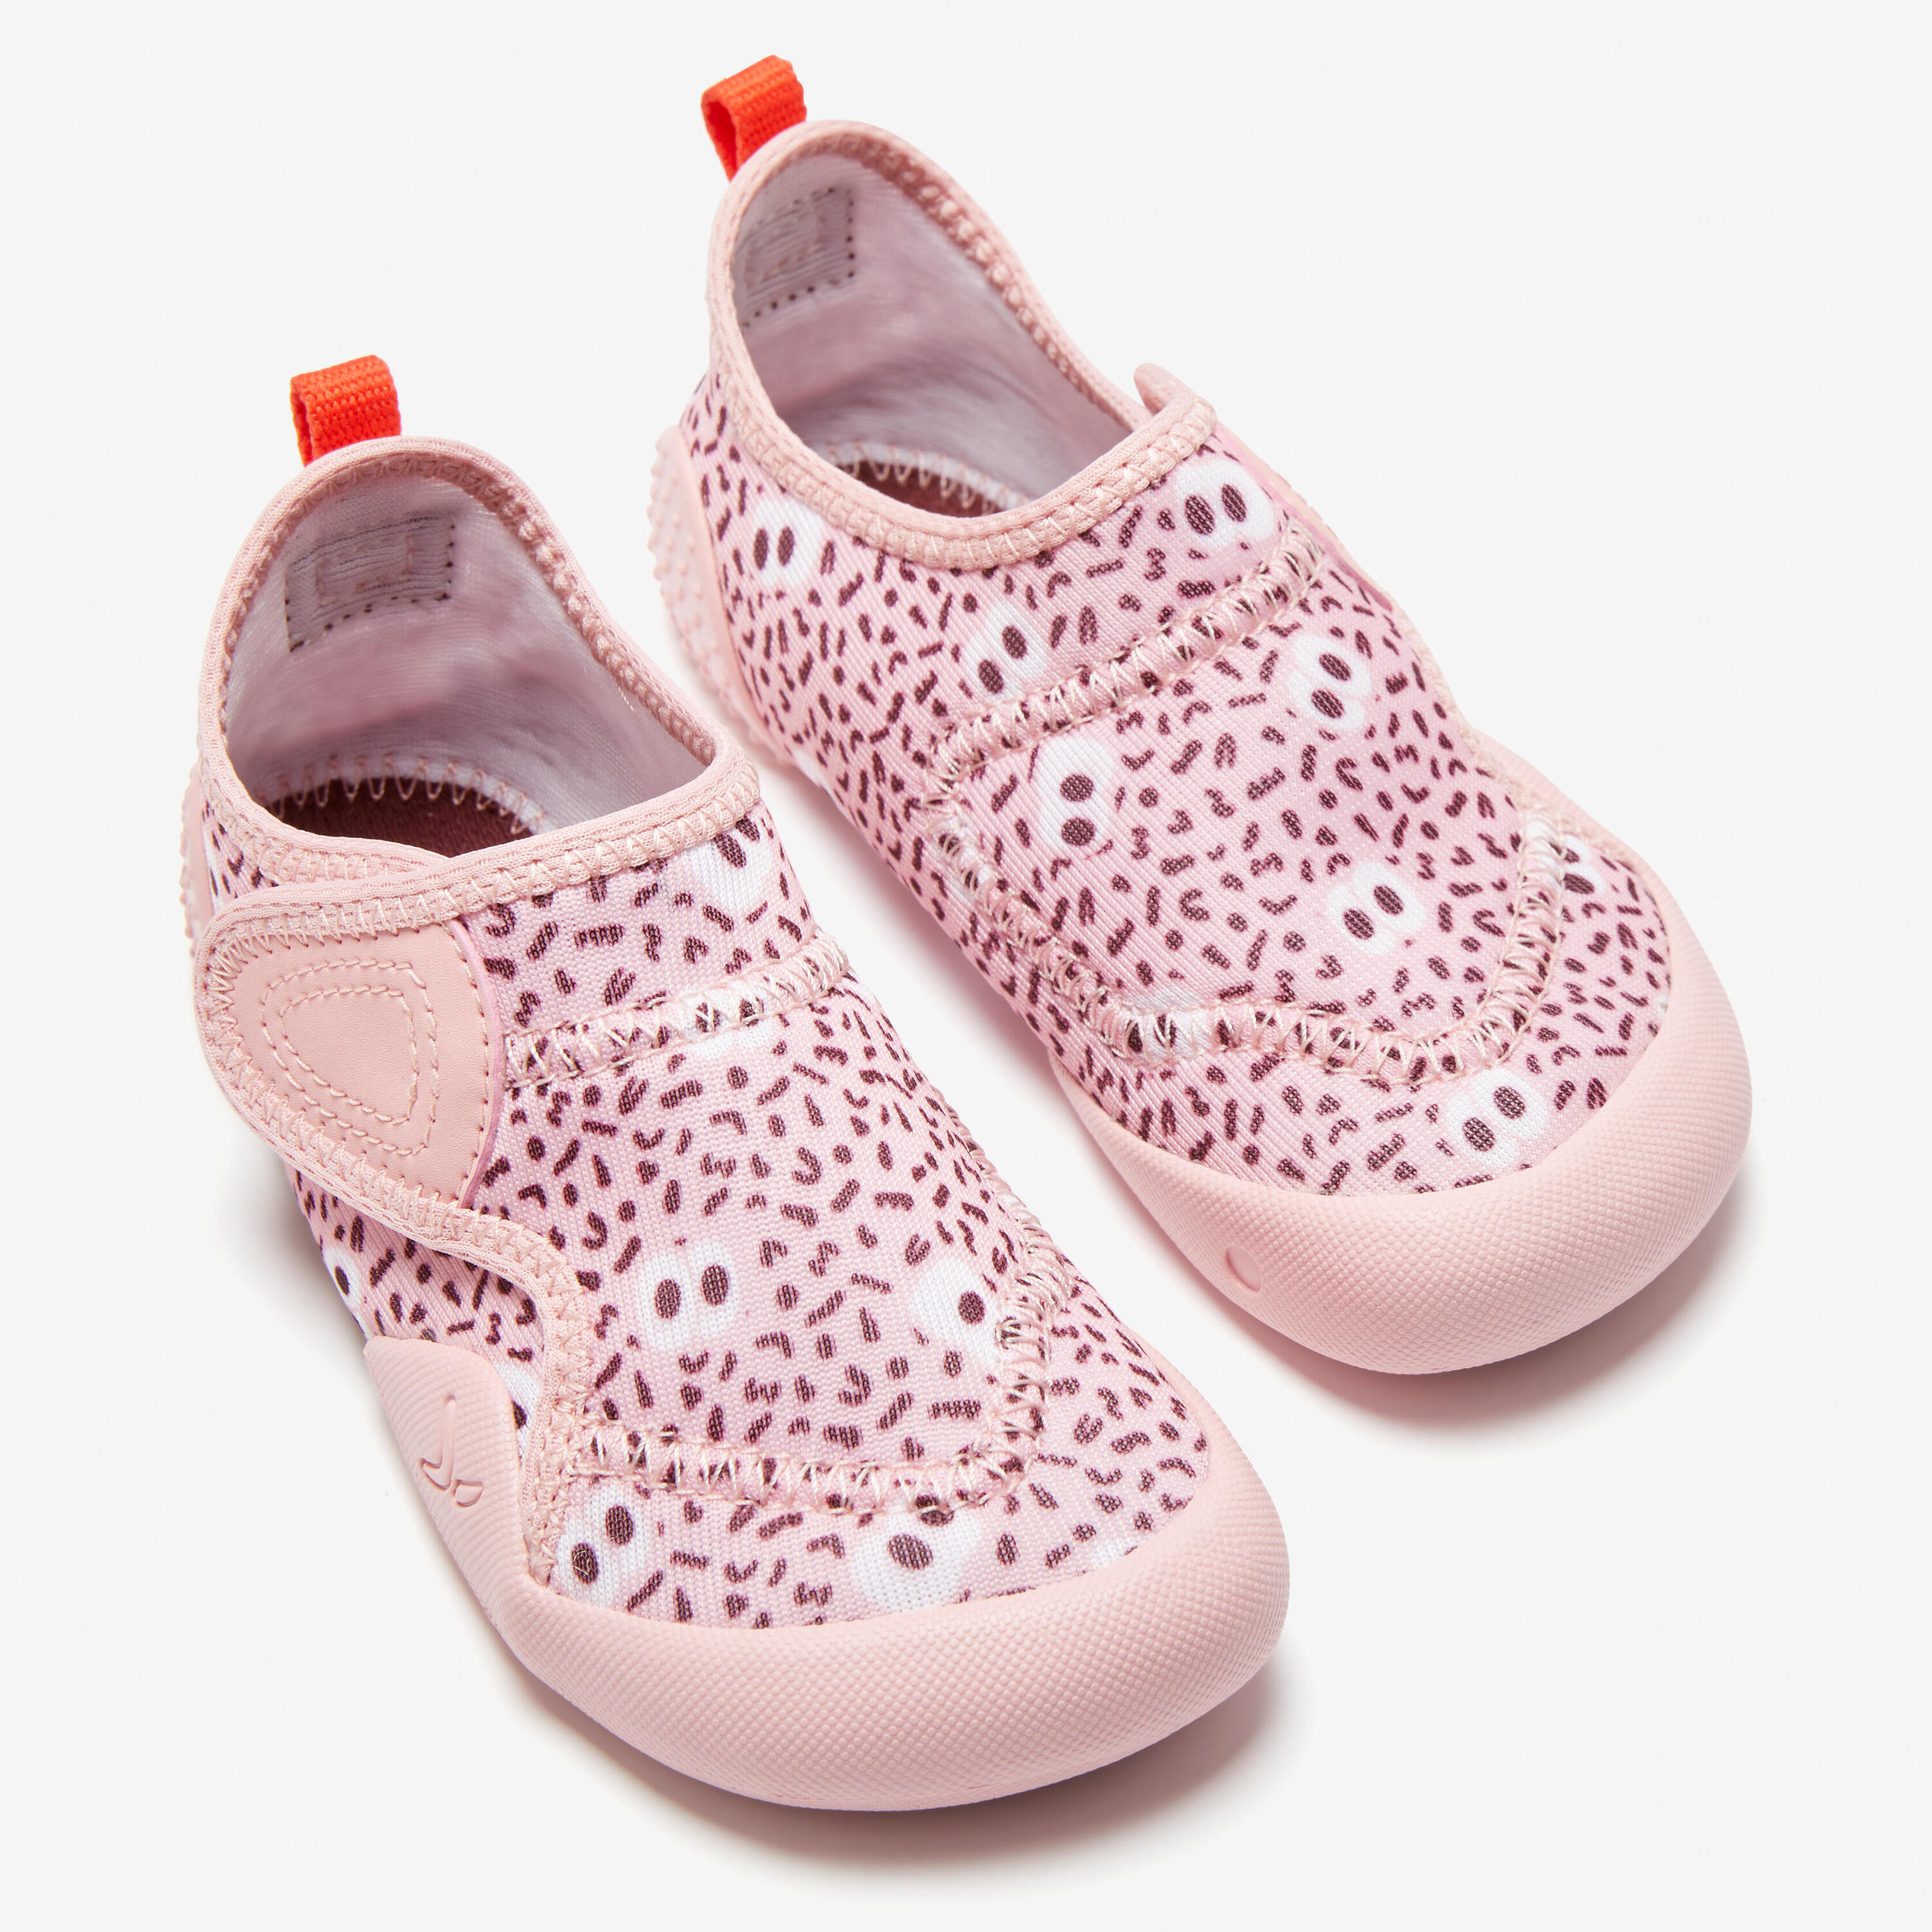 Kids' Non-Slip and Breathable Bootee - Patterns 2/8